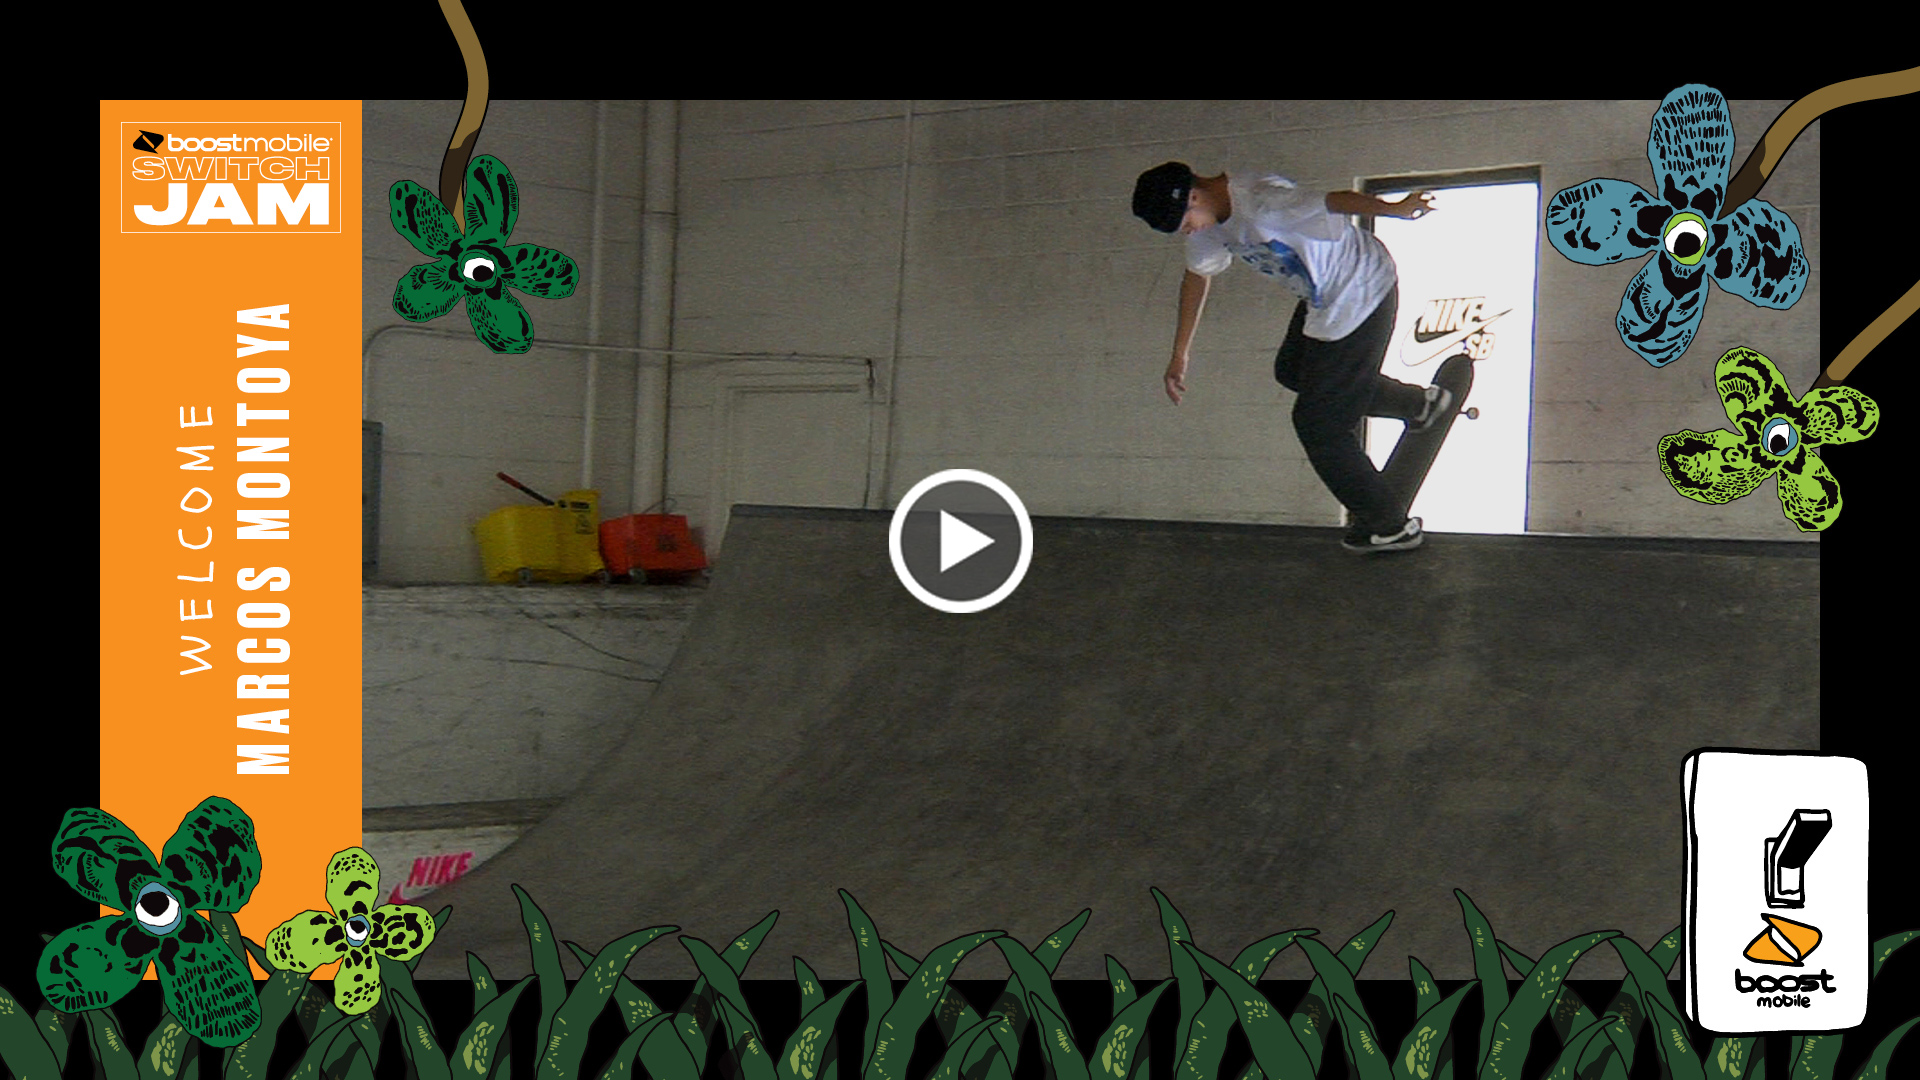 Boost Mobile Switch Jam Welcomes Marcos Montoya